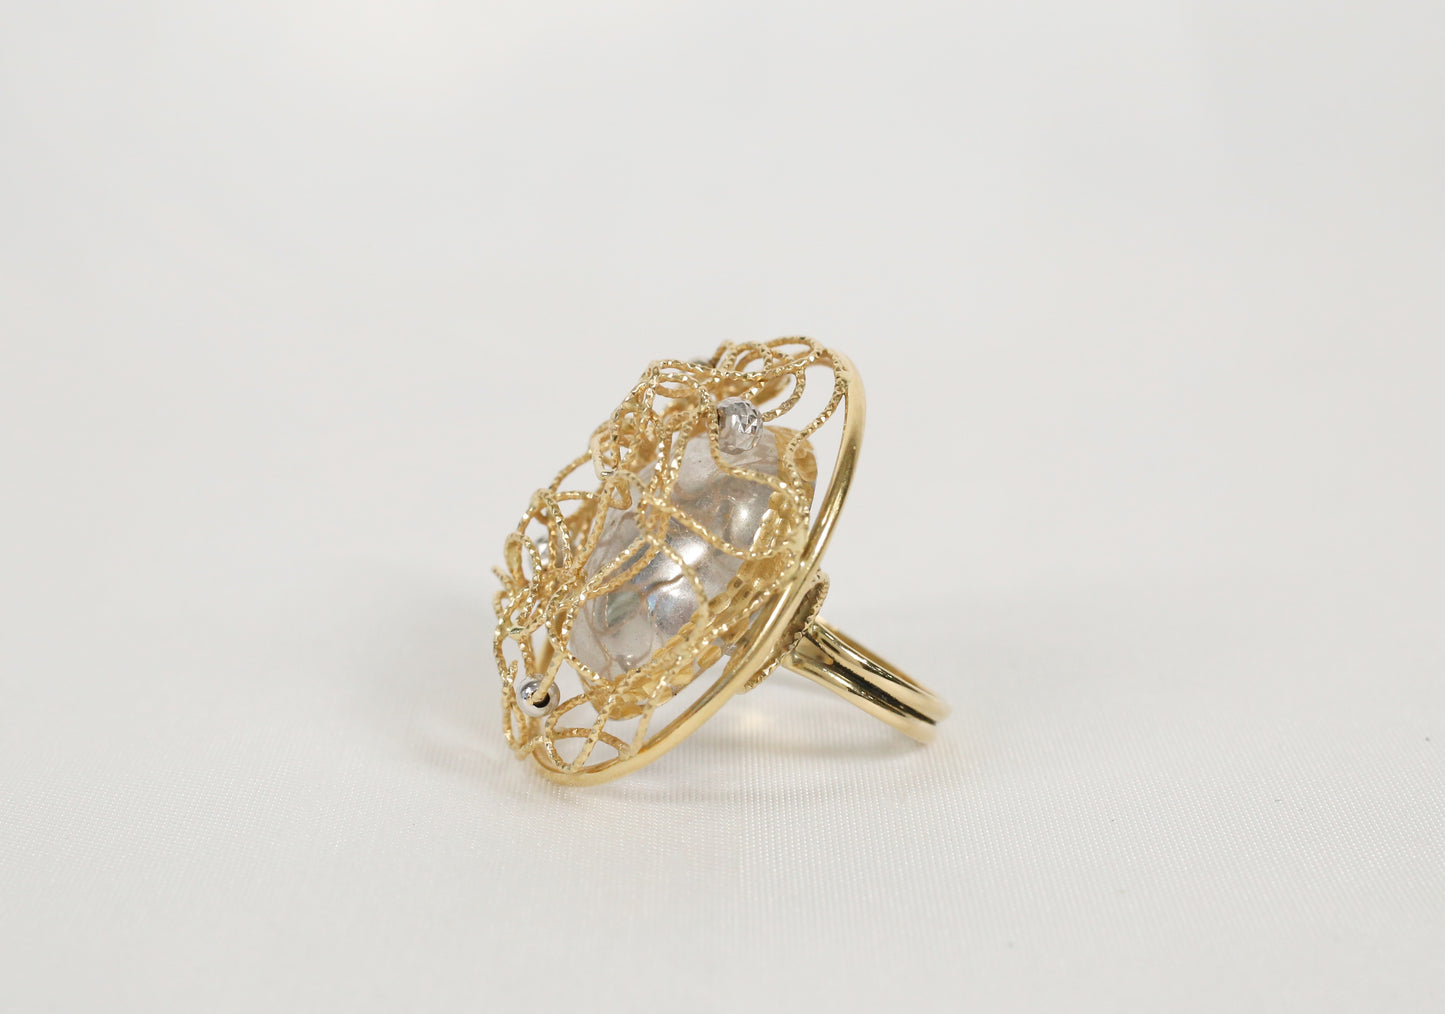 18k Yellow & White Gold Unique Wired Dome Ring, Size 8.75 - 12.5g